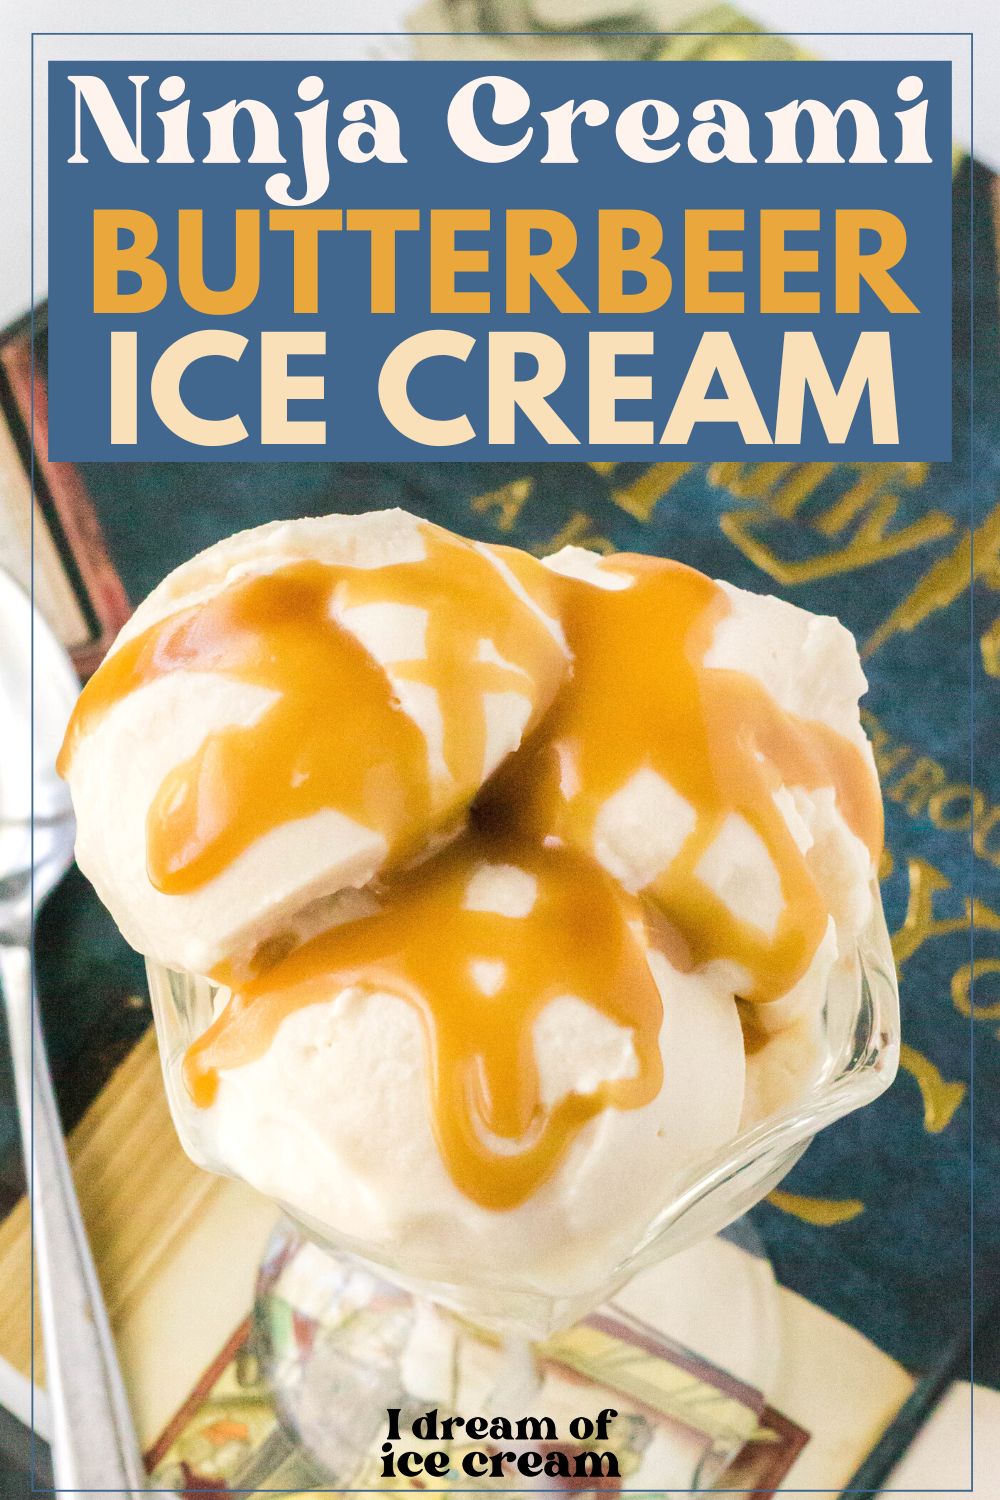 close-up view of three scoops of Butterbeer ice cream in a dessert cup, drizzled with butterscotch sauce.